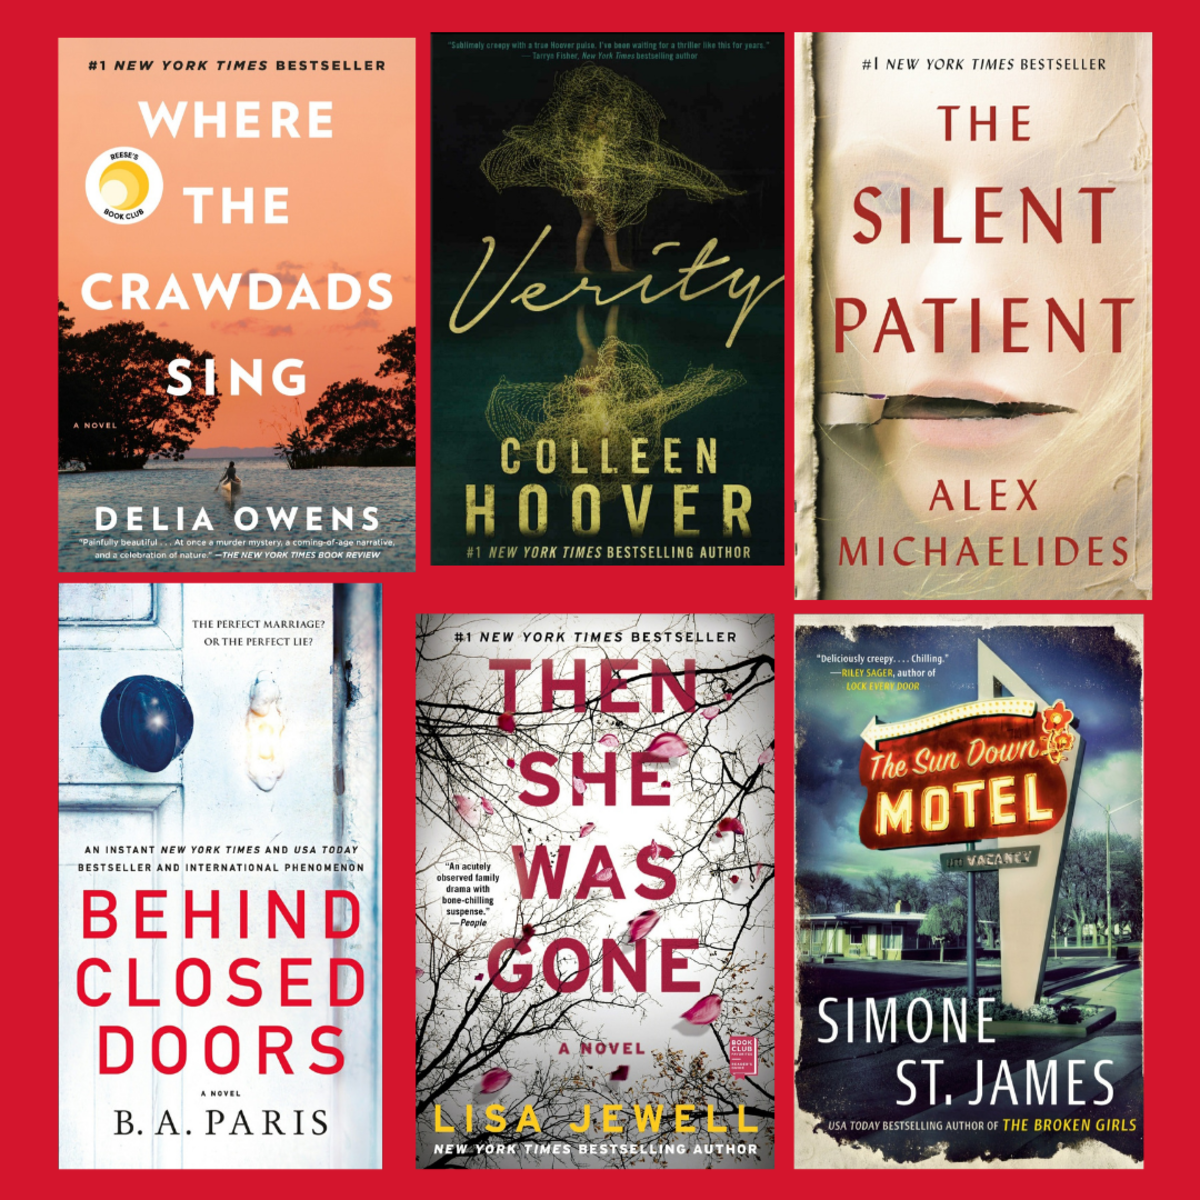 Bestselling Mystery Thriller Books You Shouldn't Miss